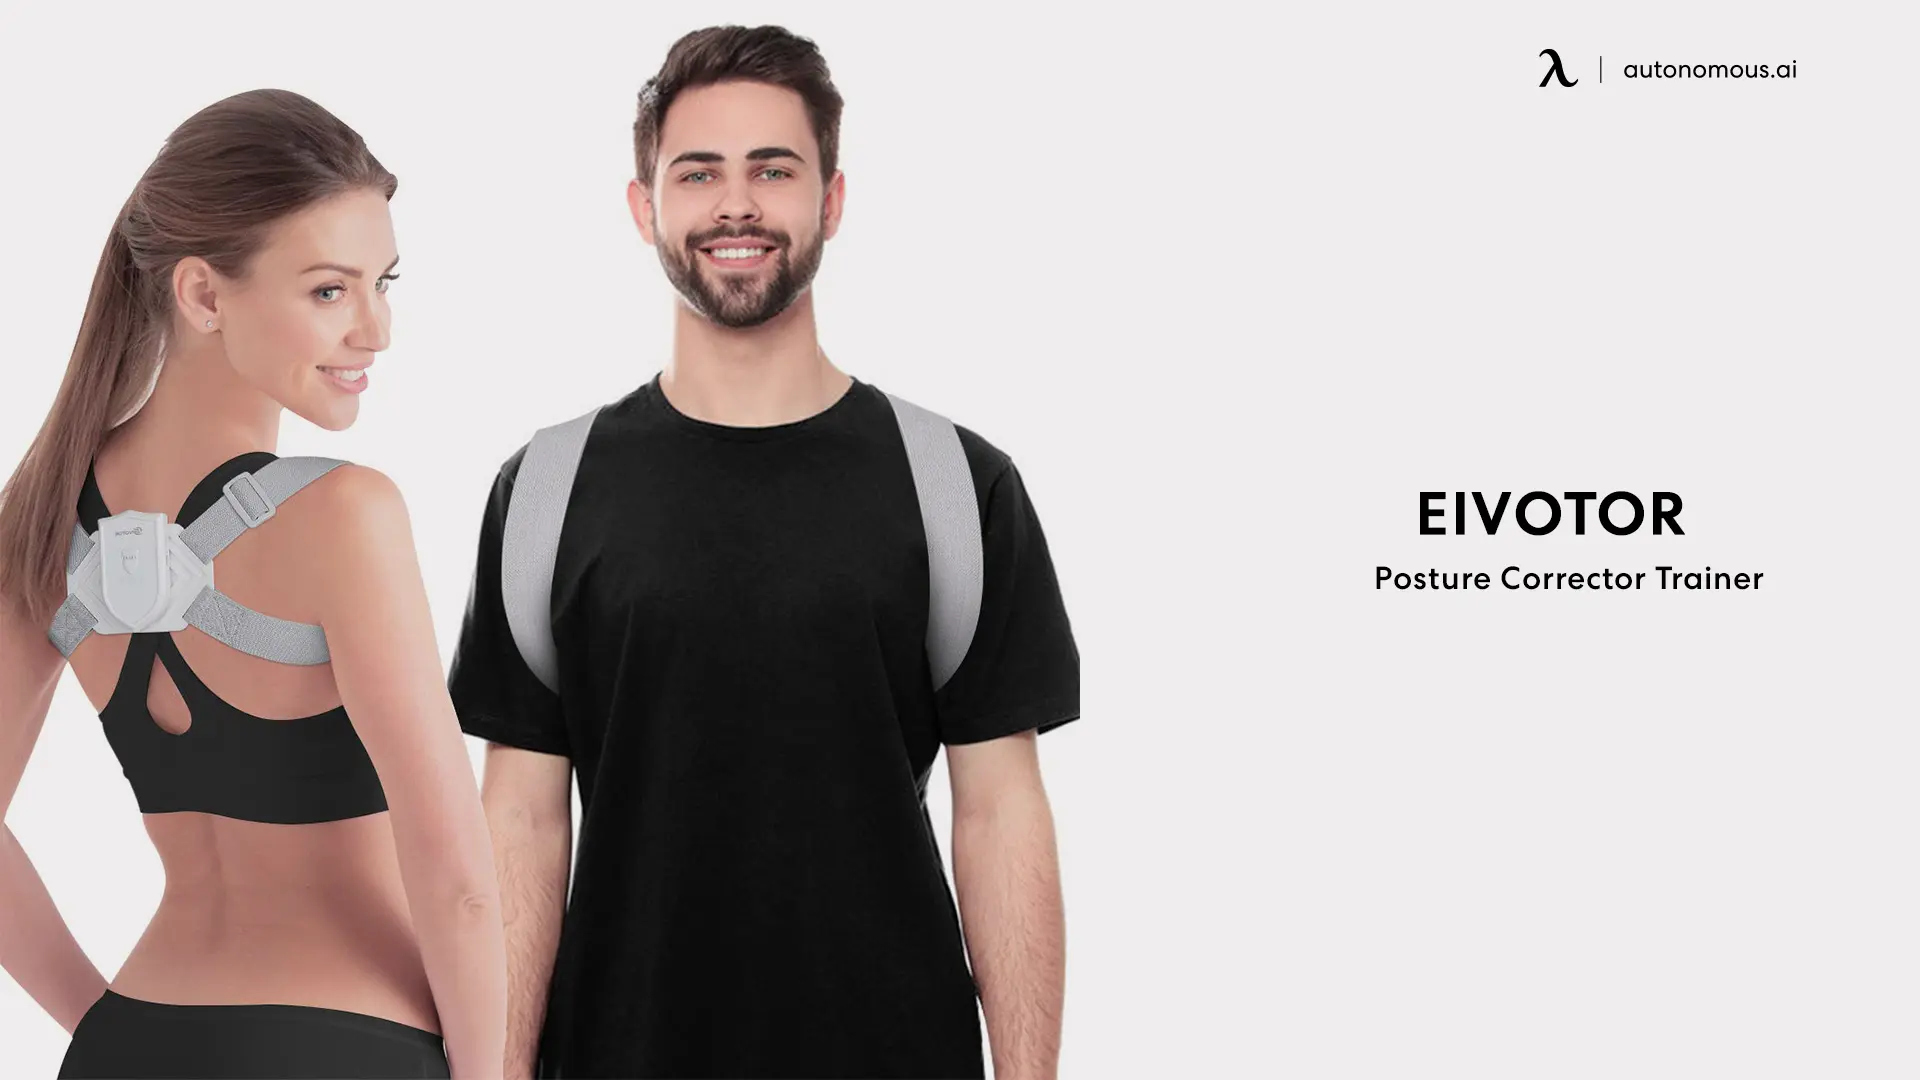 Posture Corrector Trainer by Eivotor